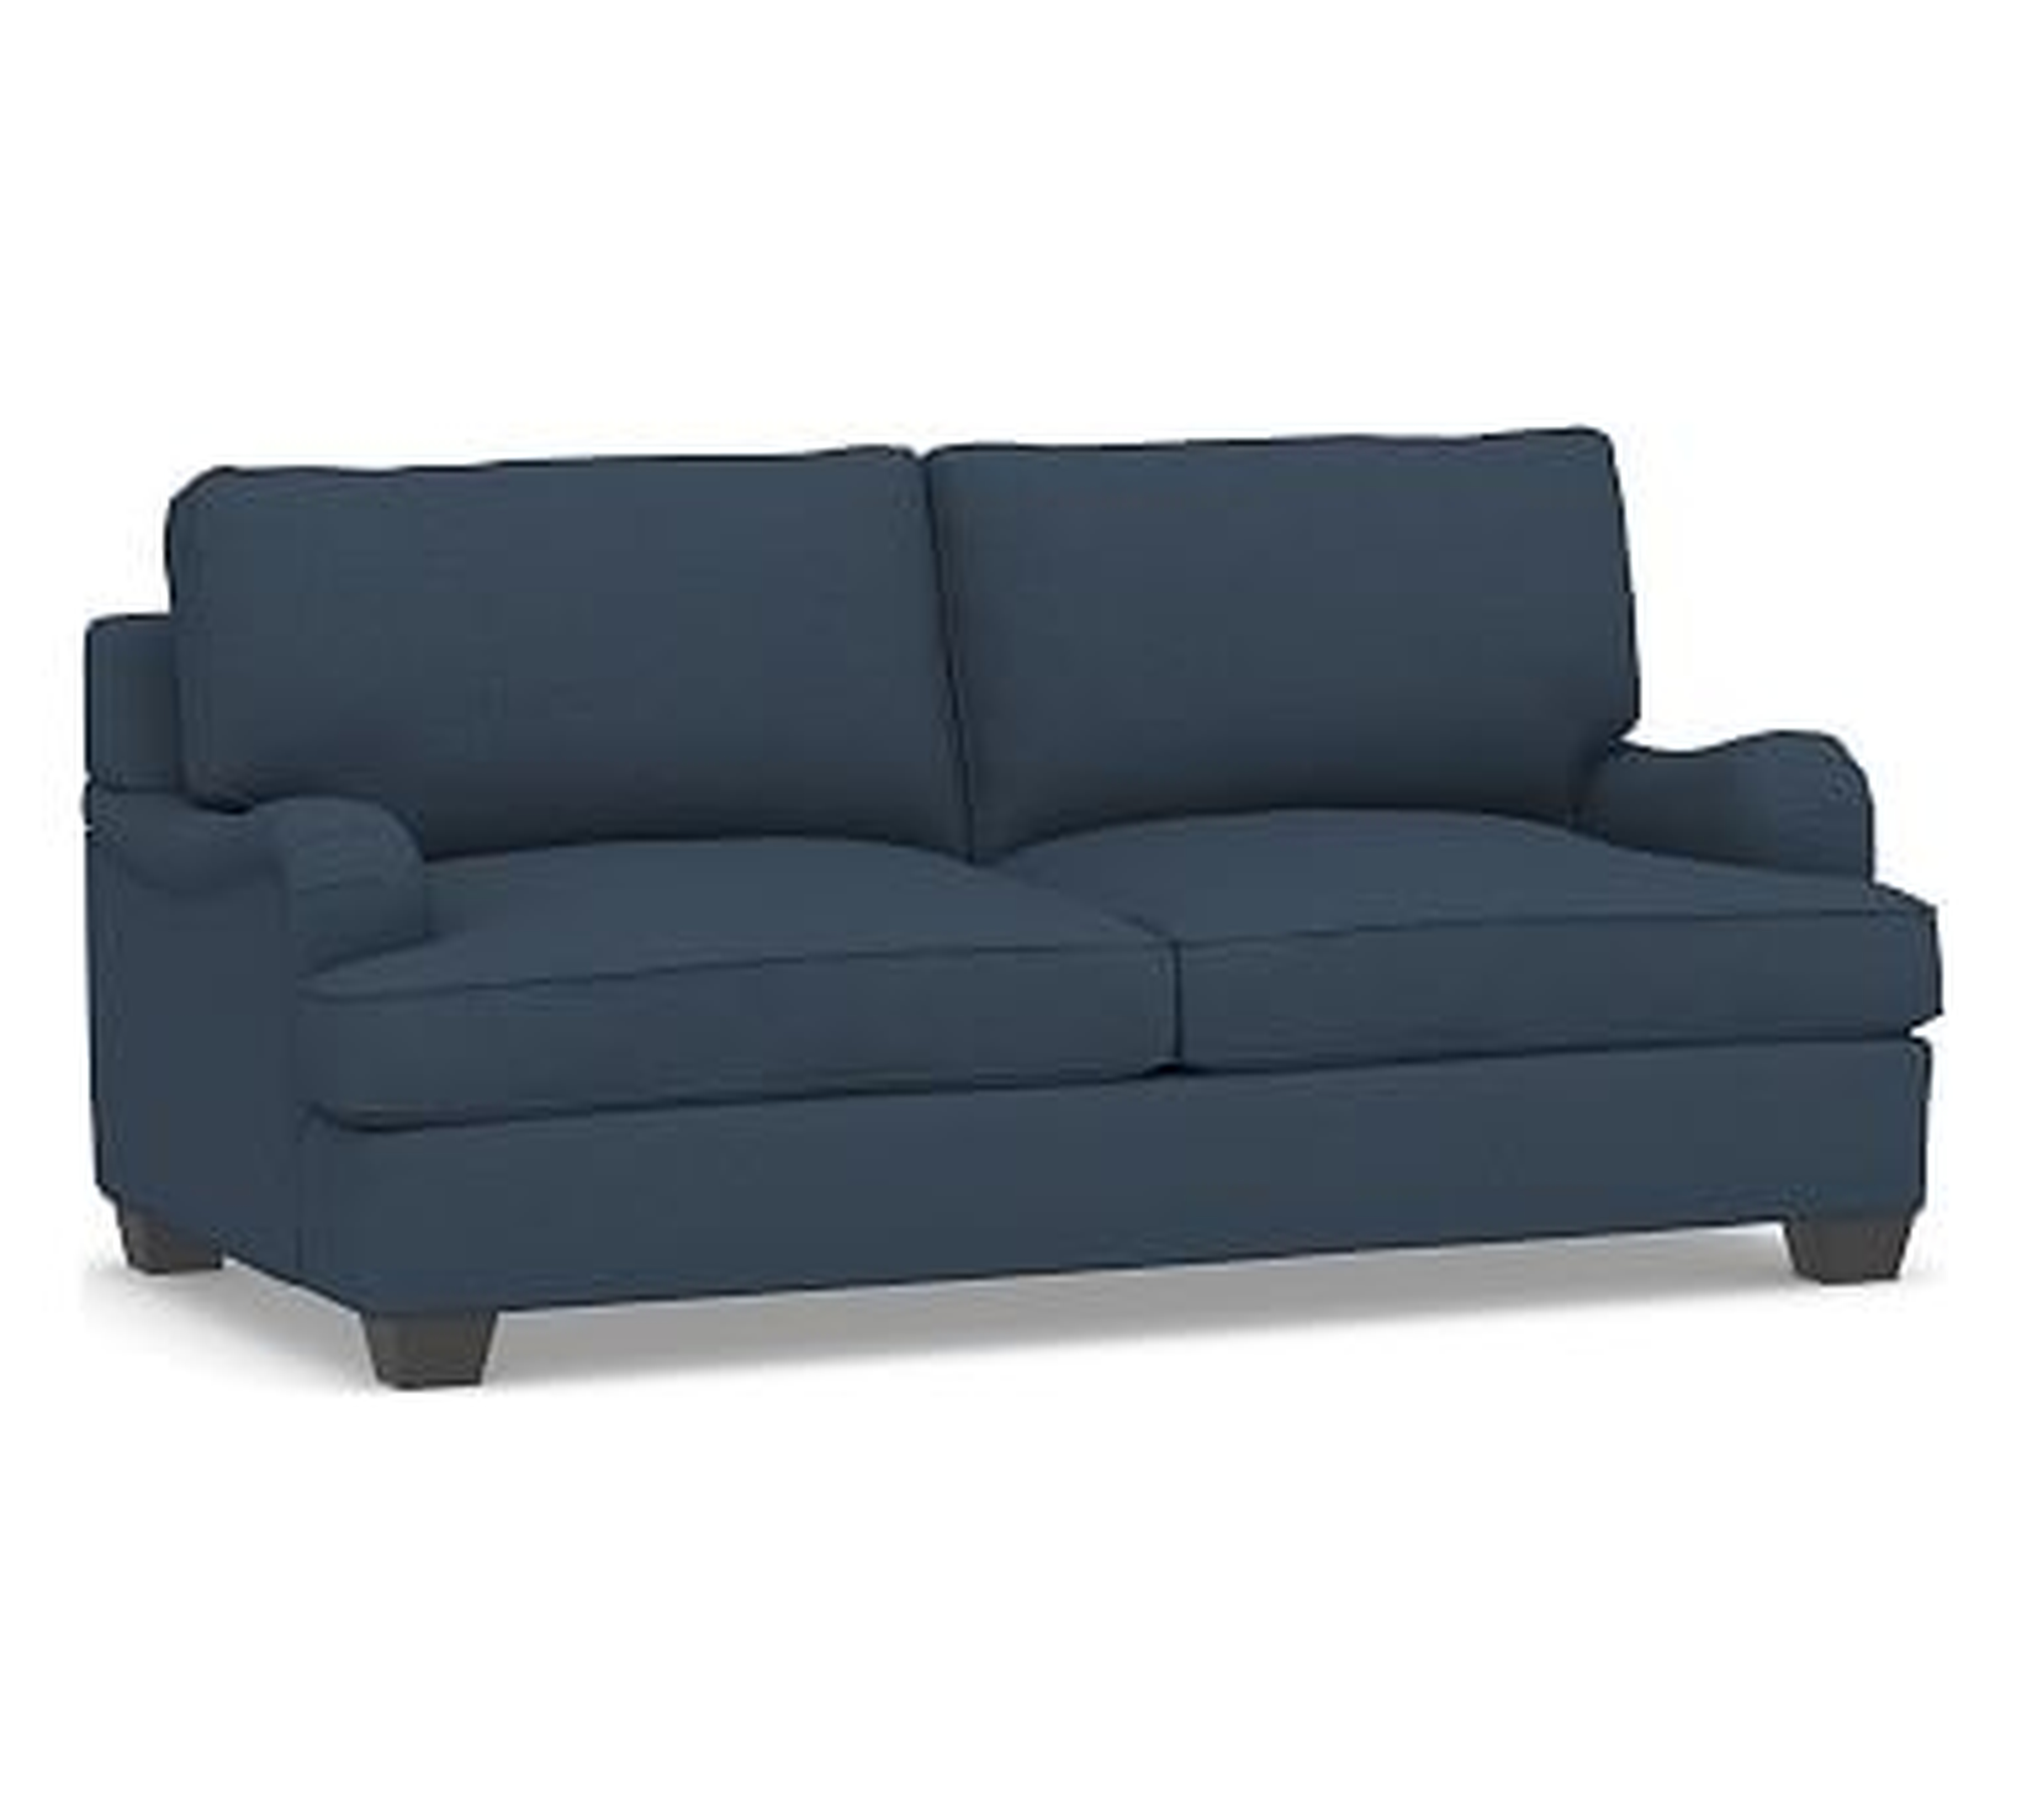 PB English Upholstered Sofa 80.5", Polyester Wrapped Cushions, Brushed Crossweave Navy - Pottery Barn